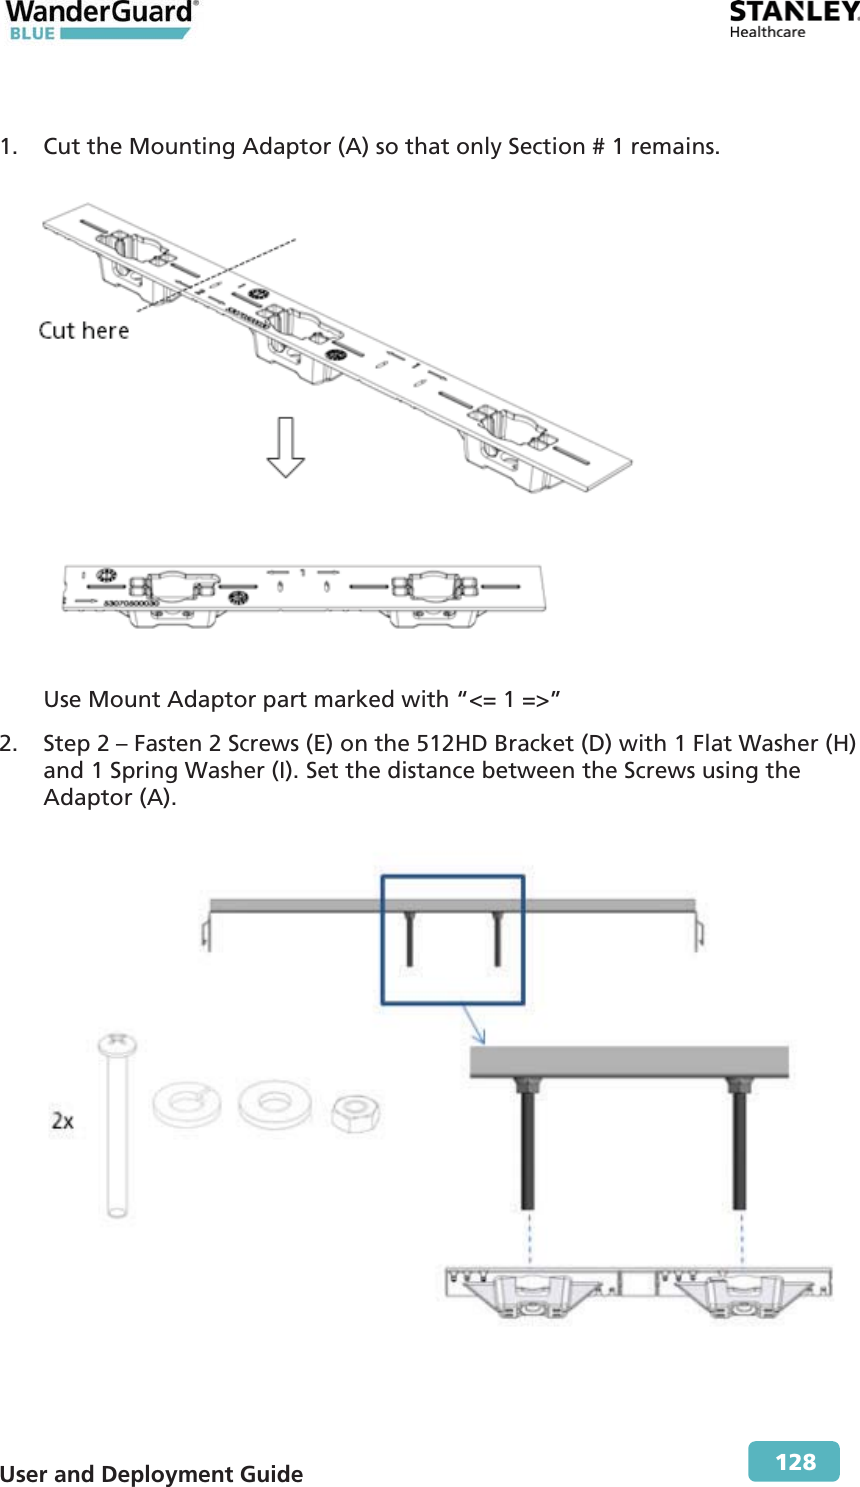  User and Deployment Guide        128  1. Cut the Mounting Adaptor (A) so that only Section # 1 remains.  Use Mount Adaptor part marked with “&lt;= 1 =&gt;” 2. Step 2 – Fasten 2 Screws (E) on the 512HD Bracket (D) with 1 Flat Washer (H) and 1 Spring Washer (I). Set the distance between the Screws using the Adaptor (A).  